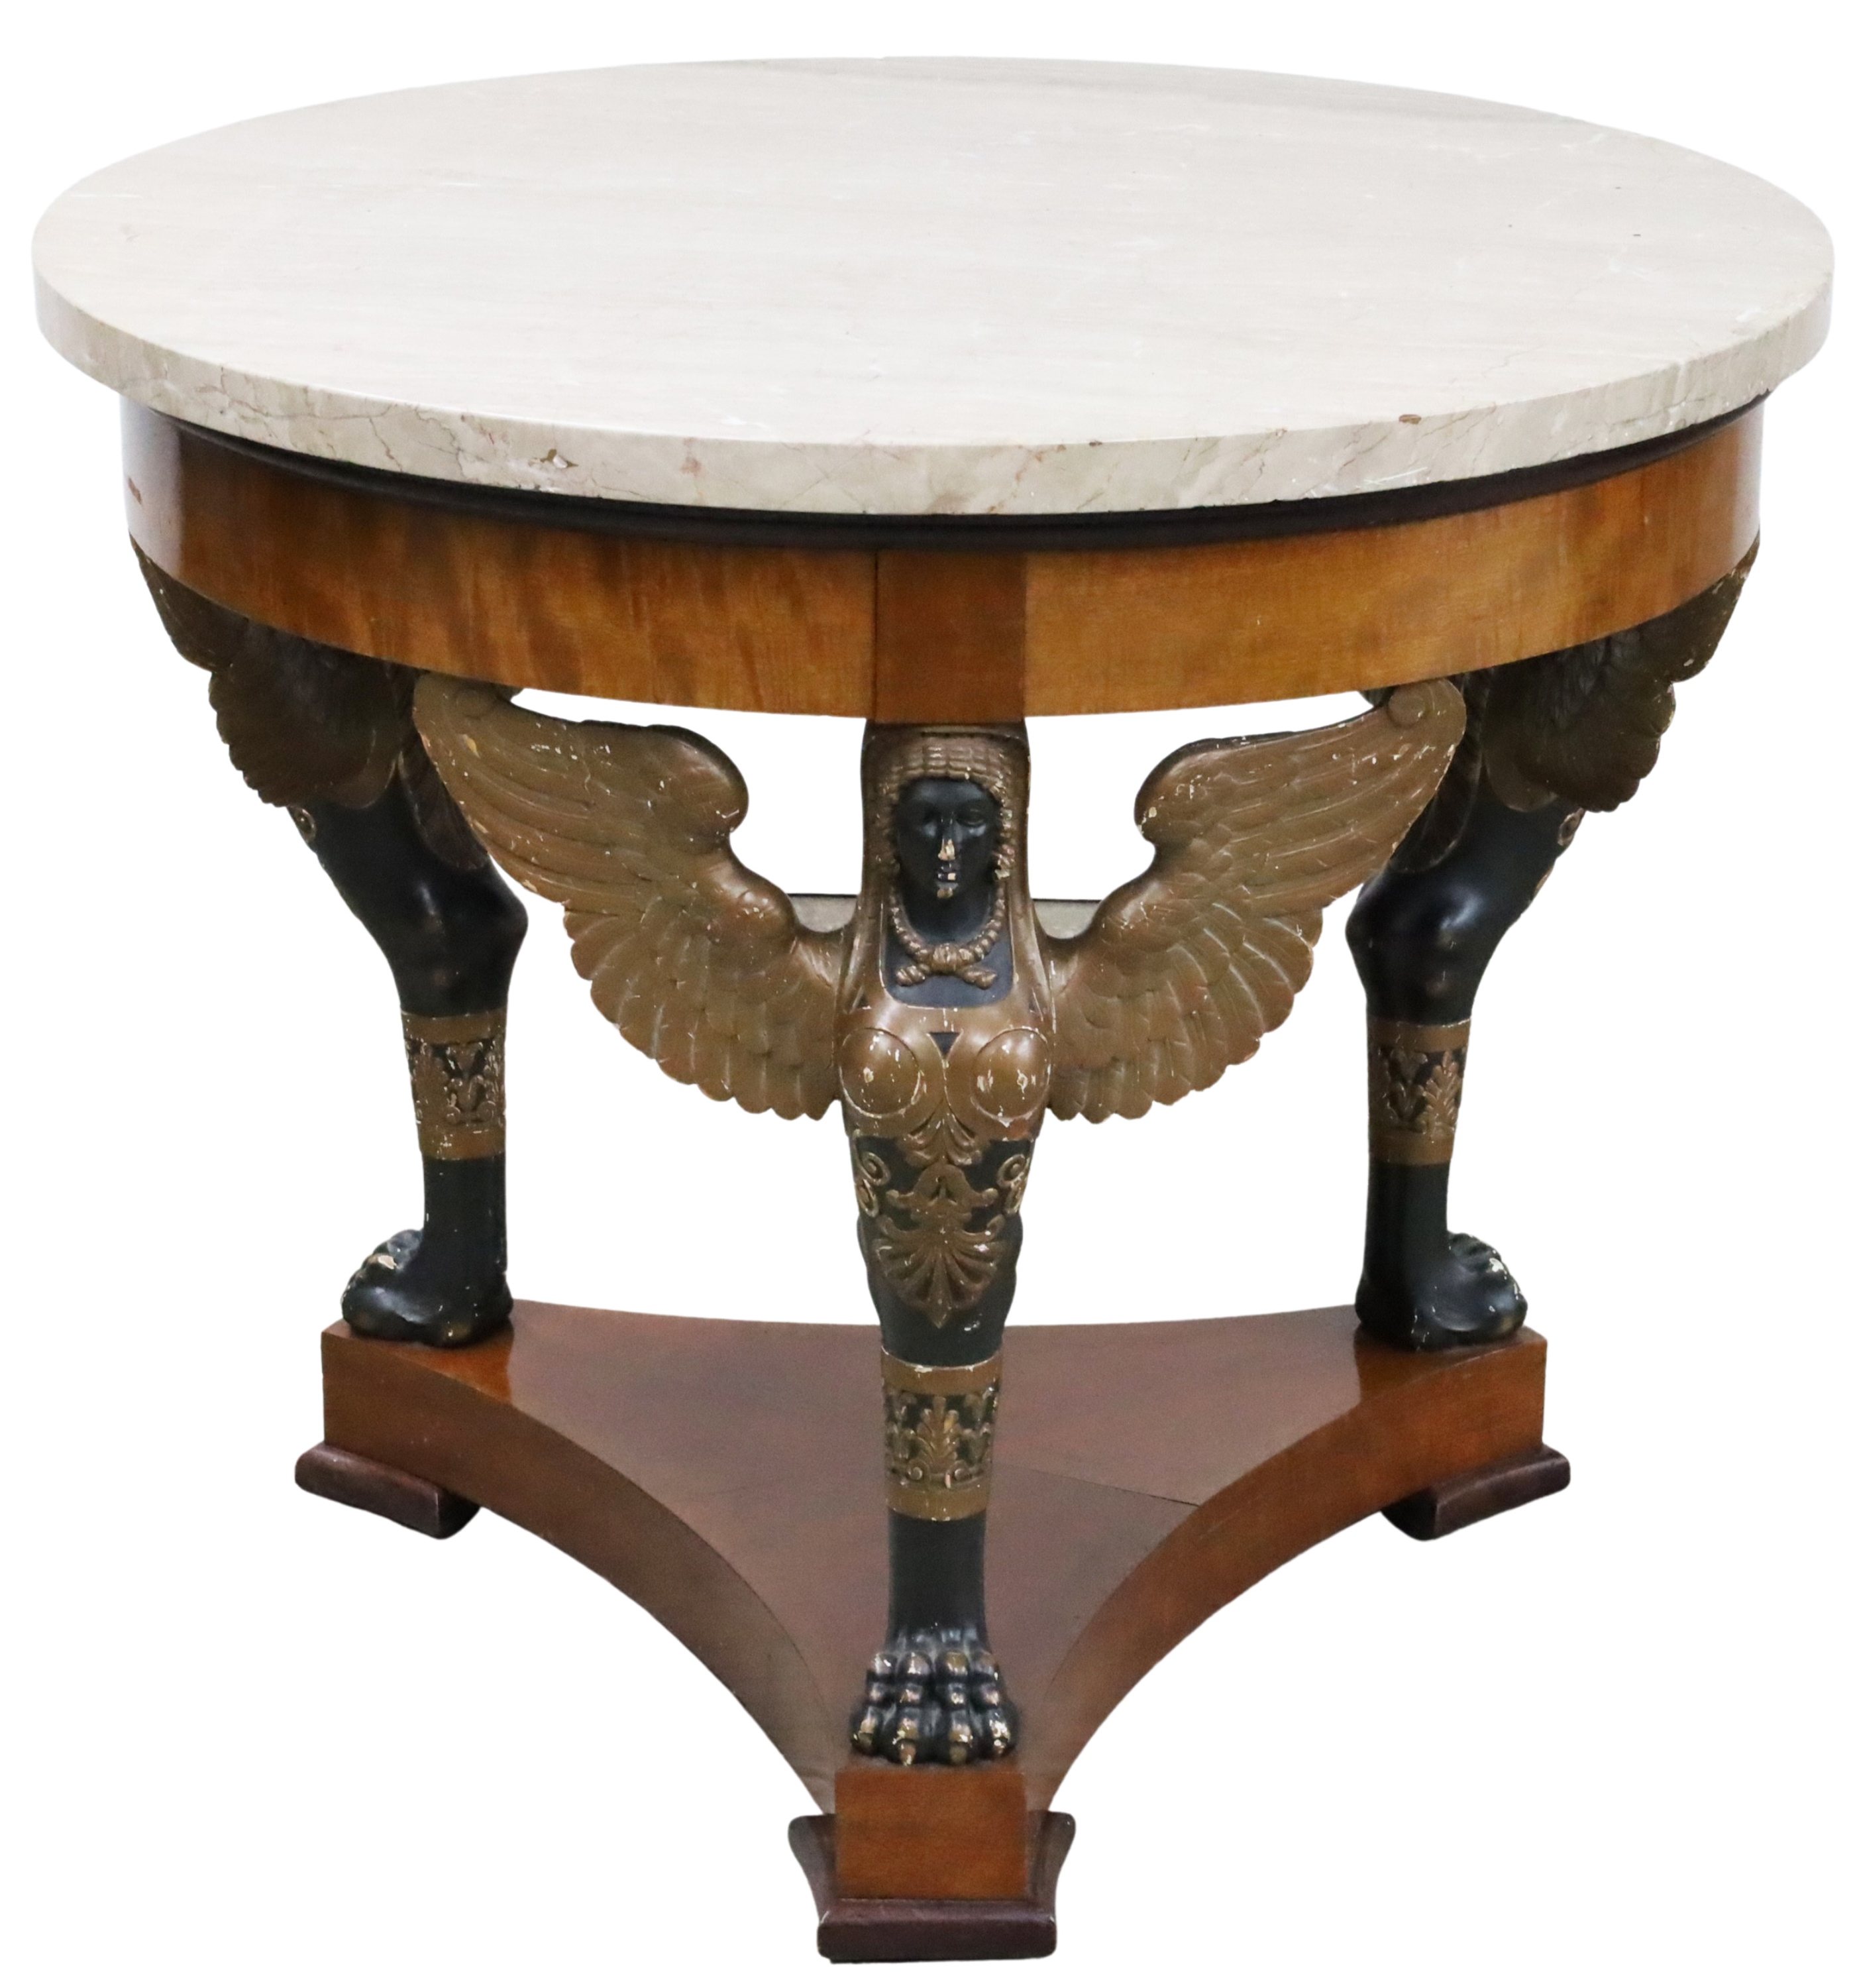 BALTIC EMPIRE STYLE MARBLE TOP 2f8bd6